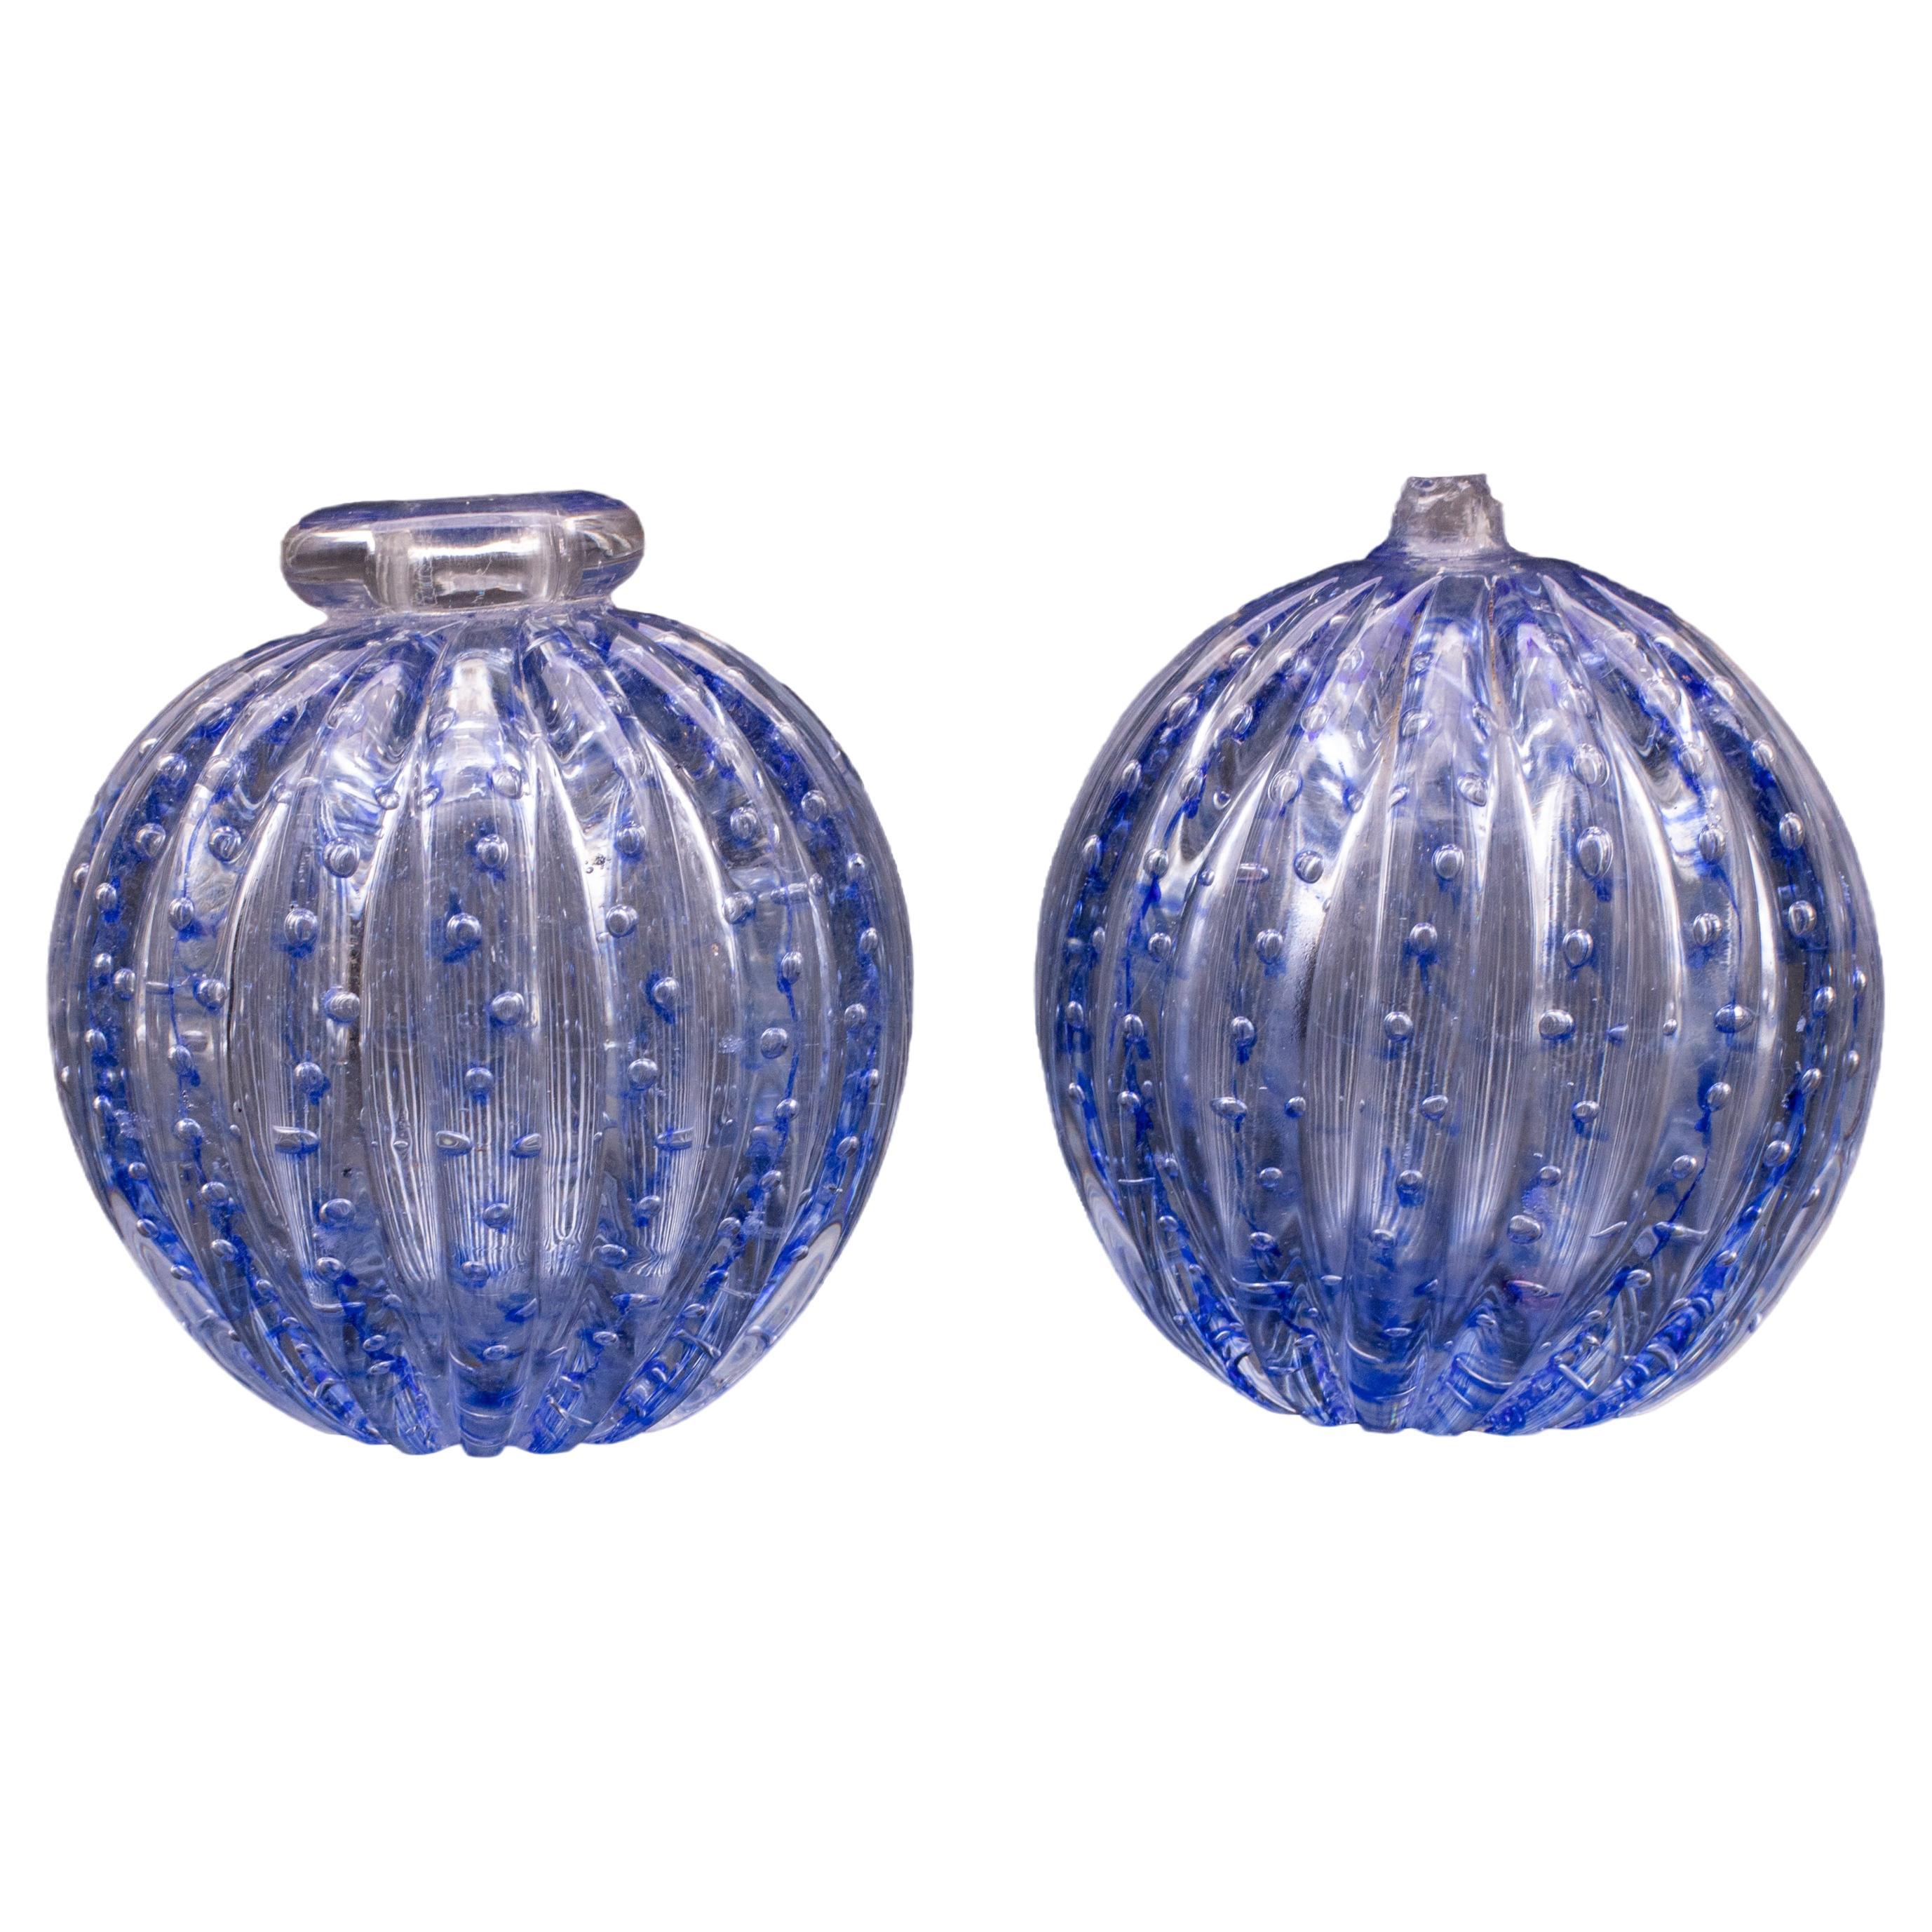 Set of 2 Bubbles Blu Vase by Barovier e Toso, 1950s For Sale